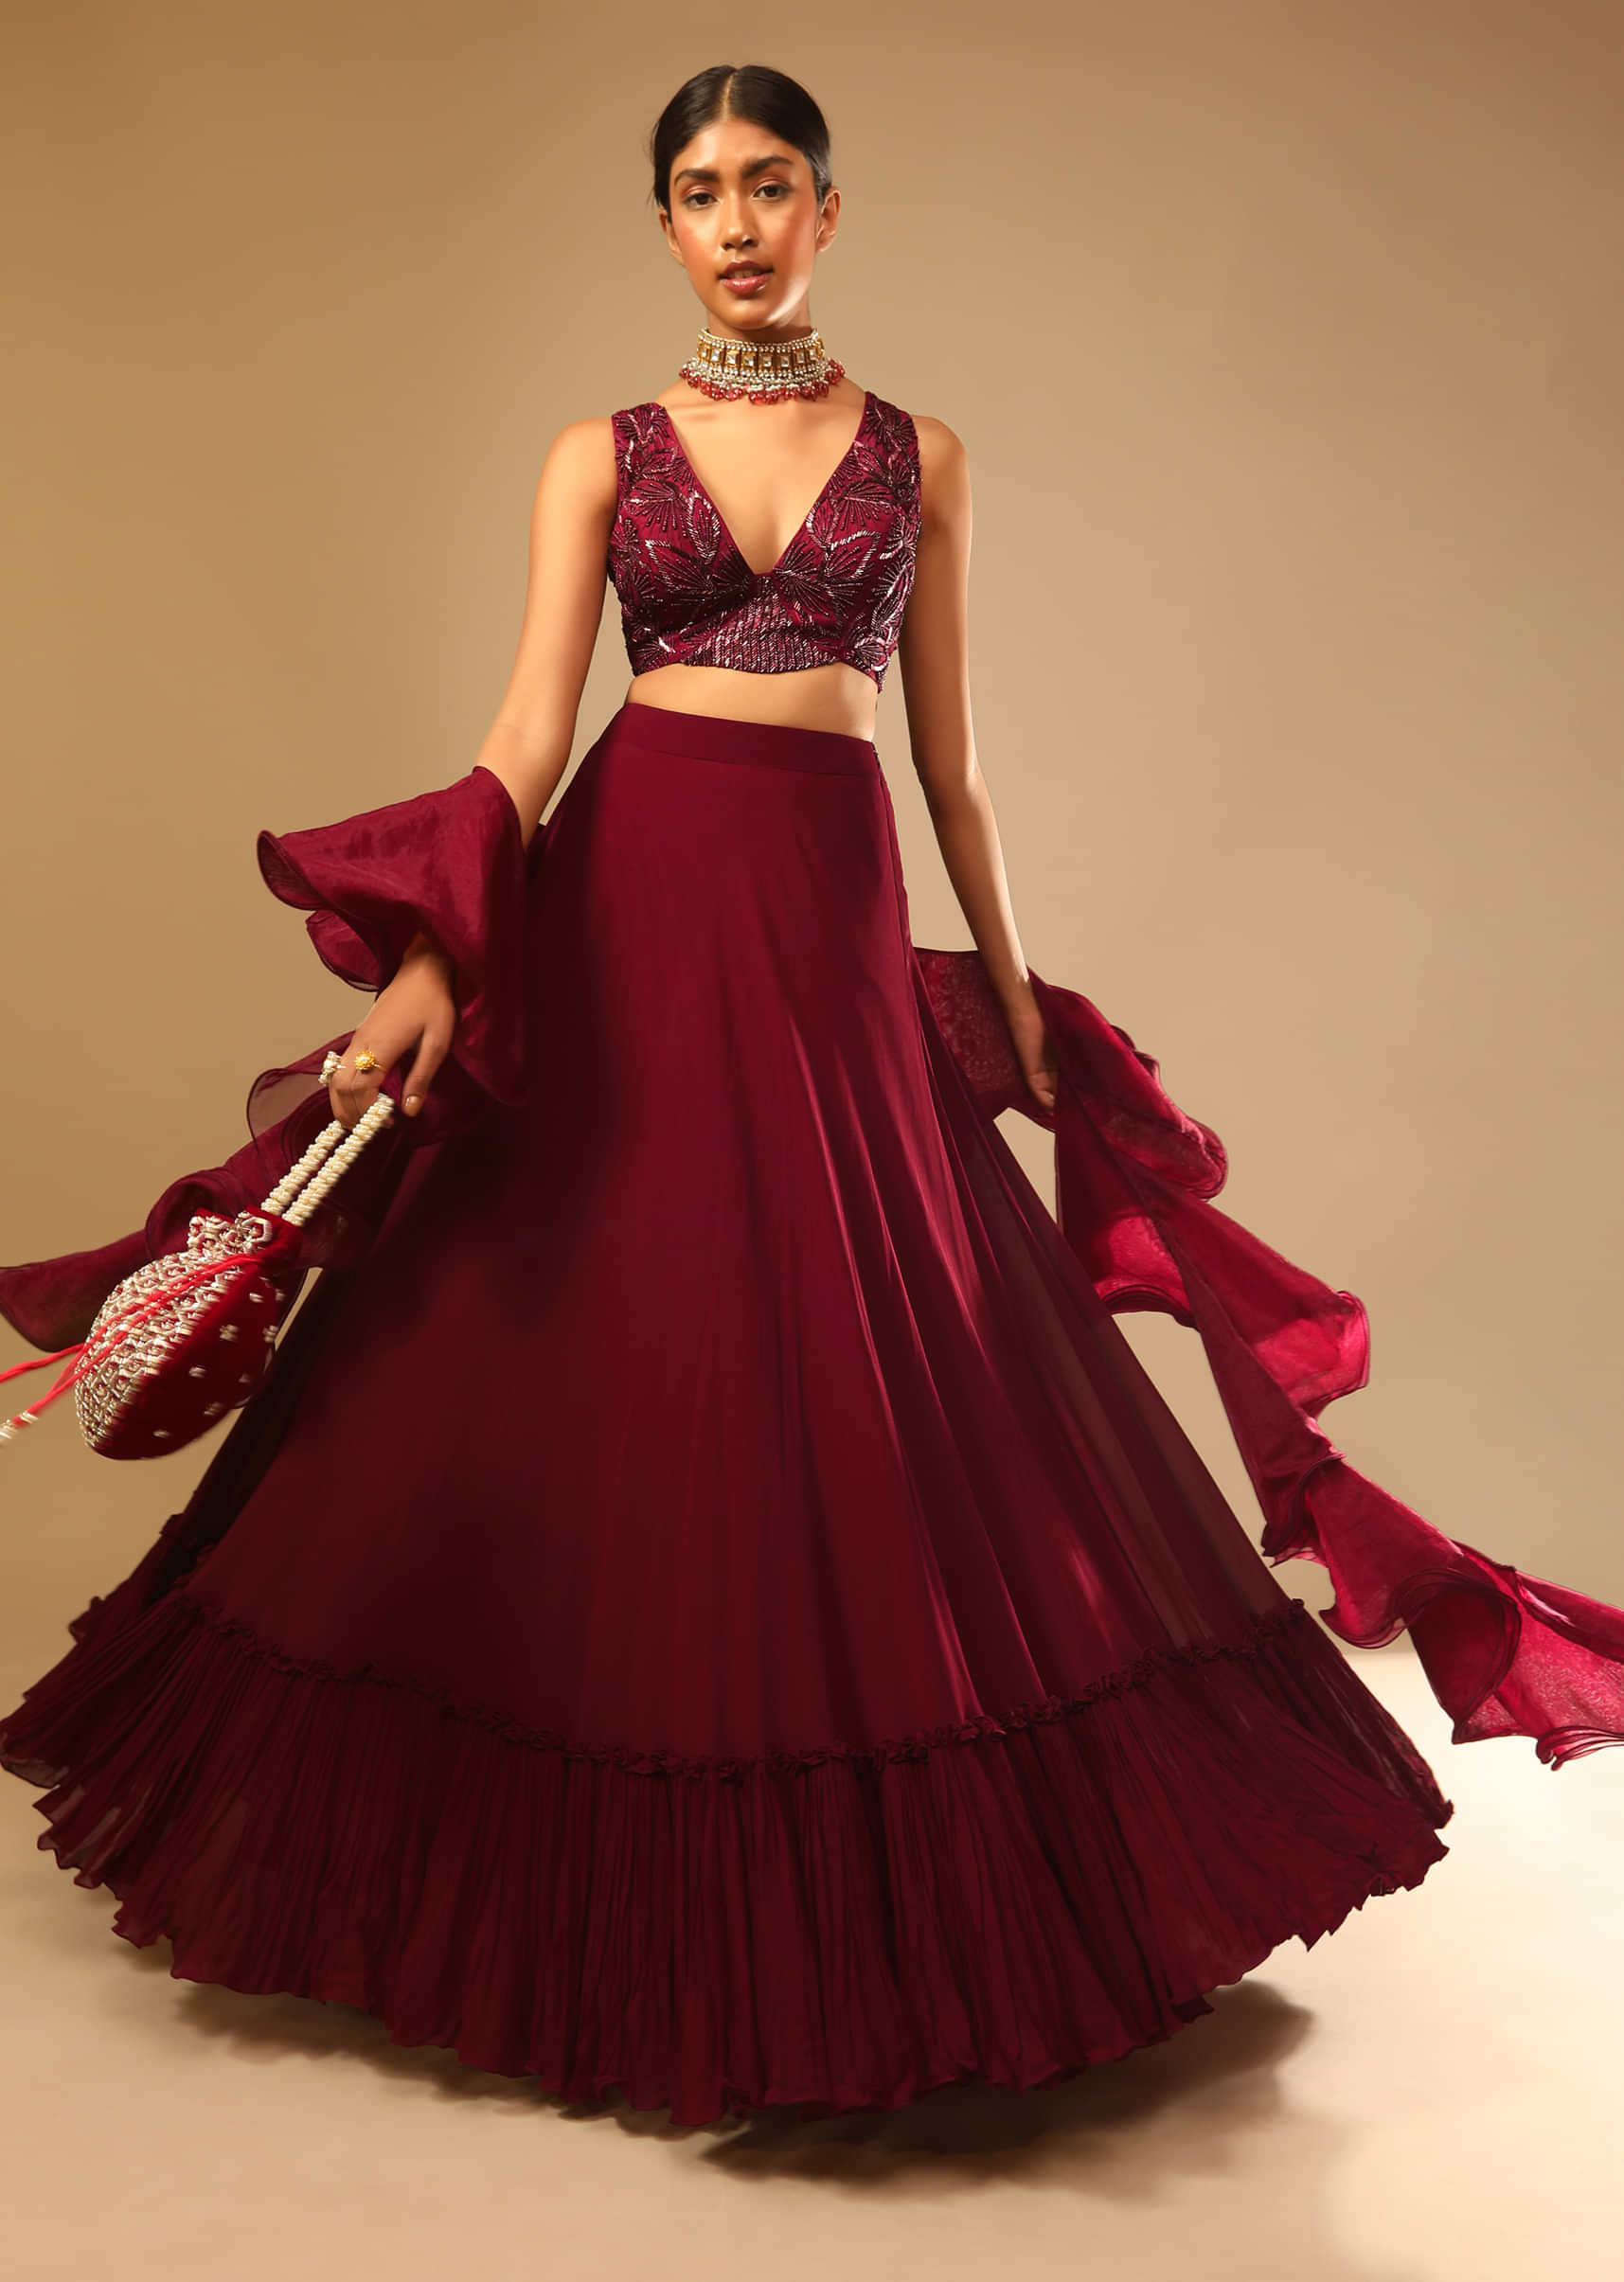 Brides That Picked Wine Coloured Lehengas For Their Wedding Soirees! |  Wedding matching outfits, Couple wedding dress, Couple dress